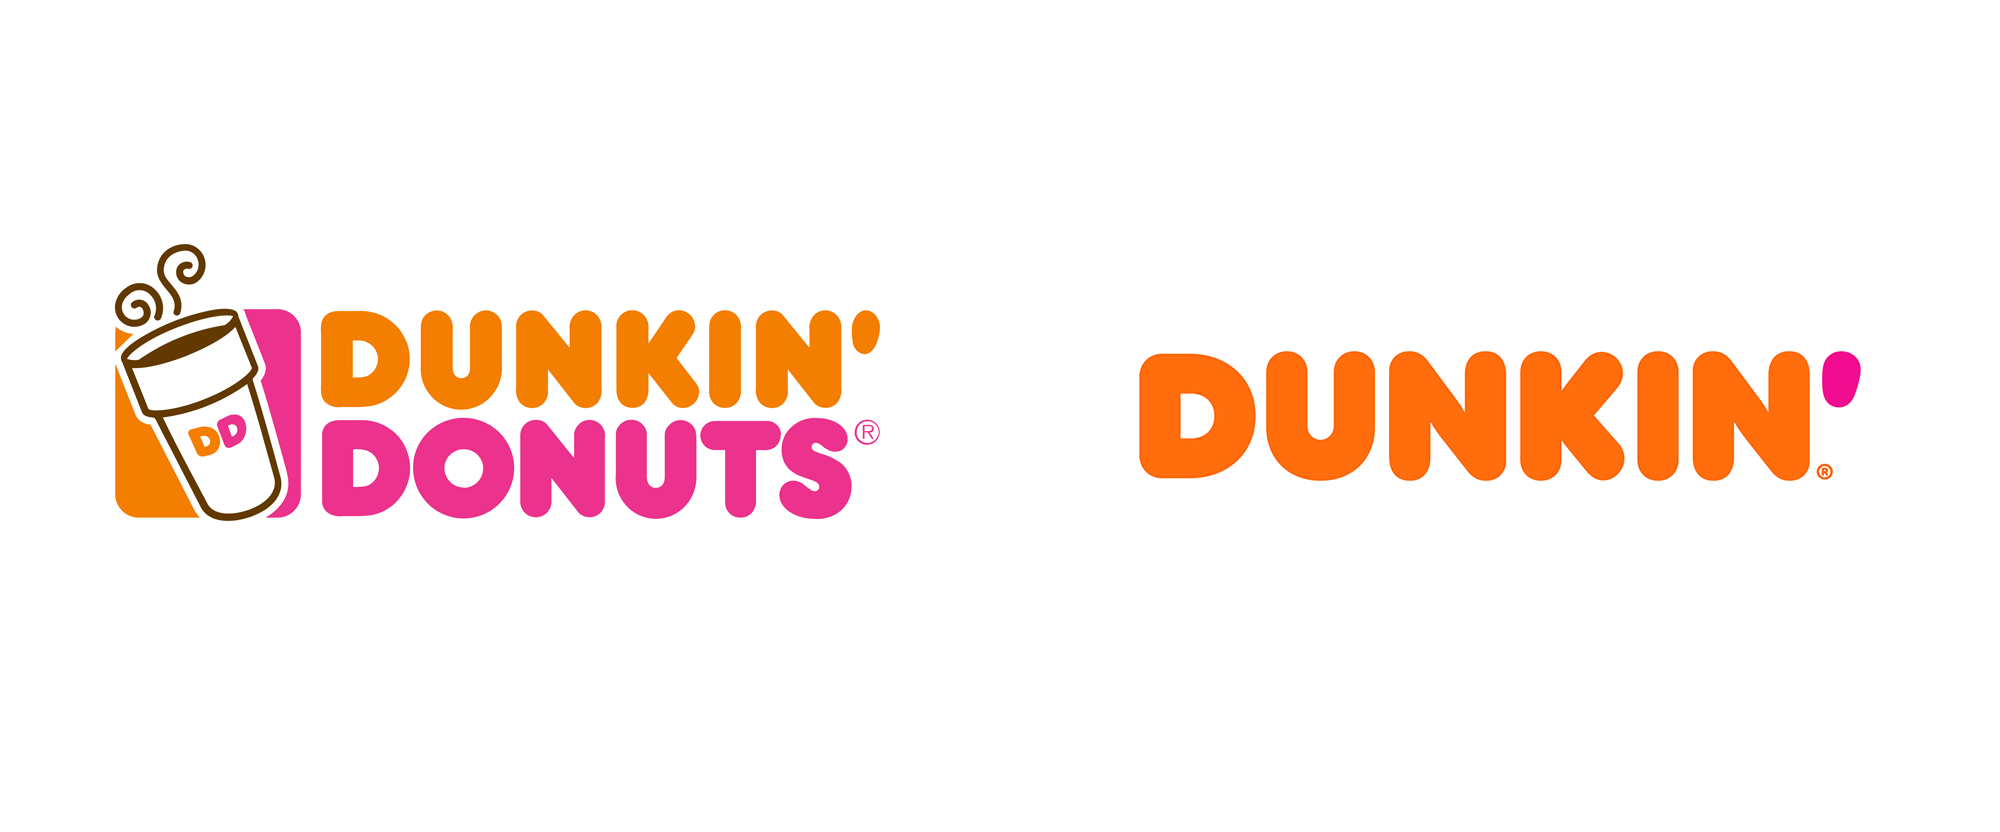 New Name and Logo for Dunkin' by Jones Knowles Ritchie